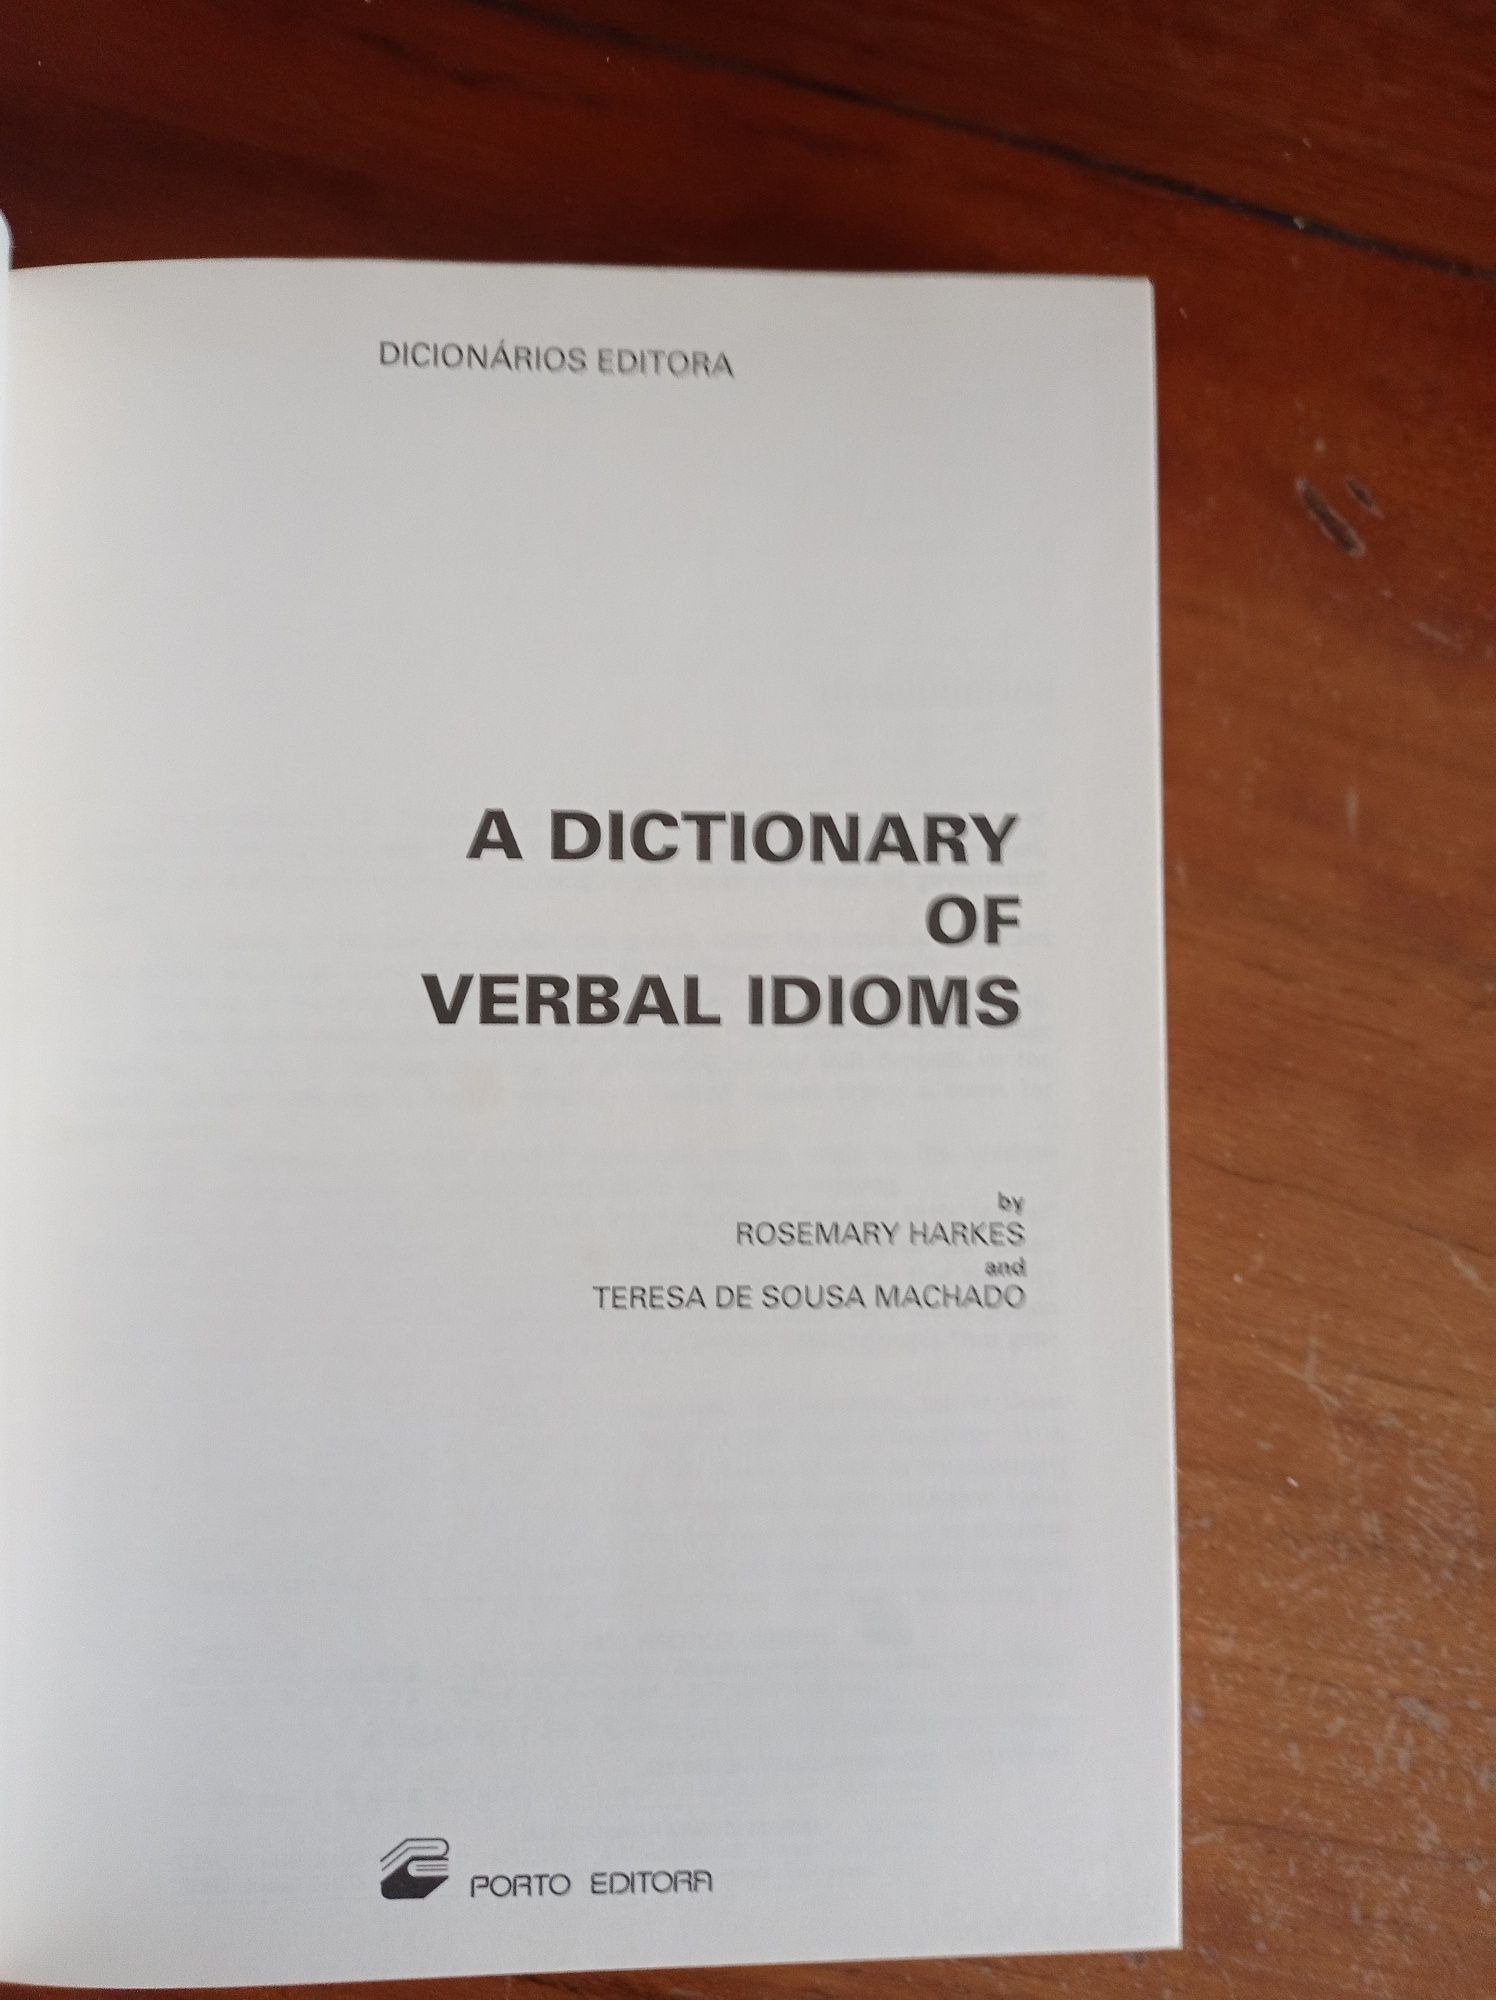 Dictionary of verbal idioms